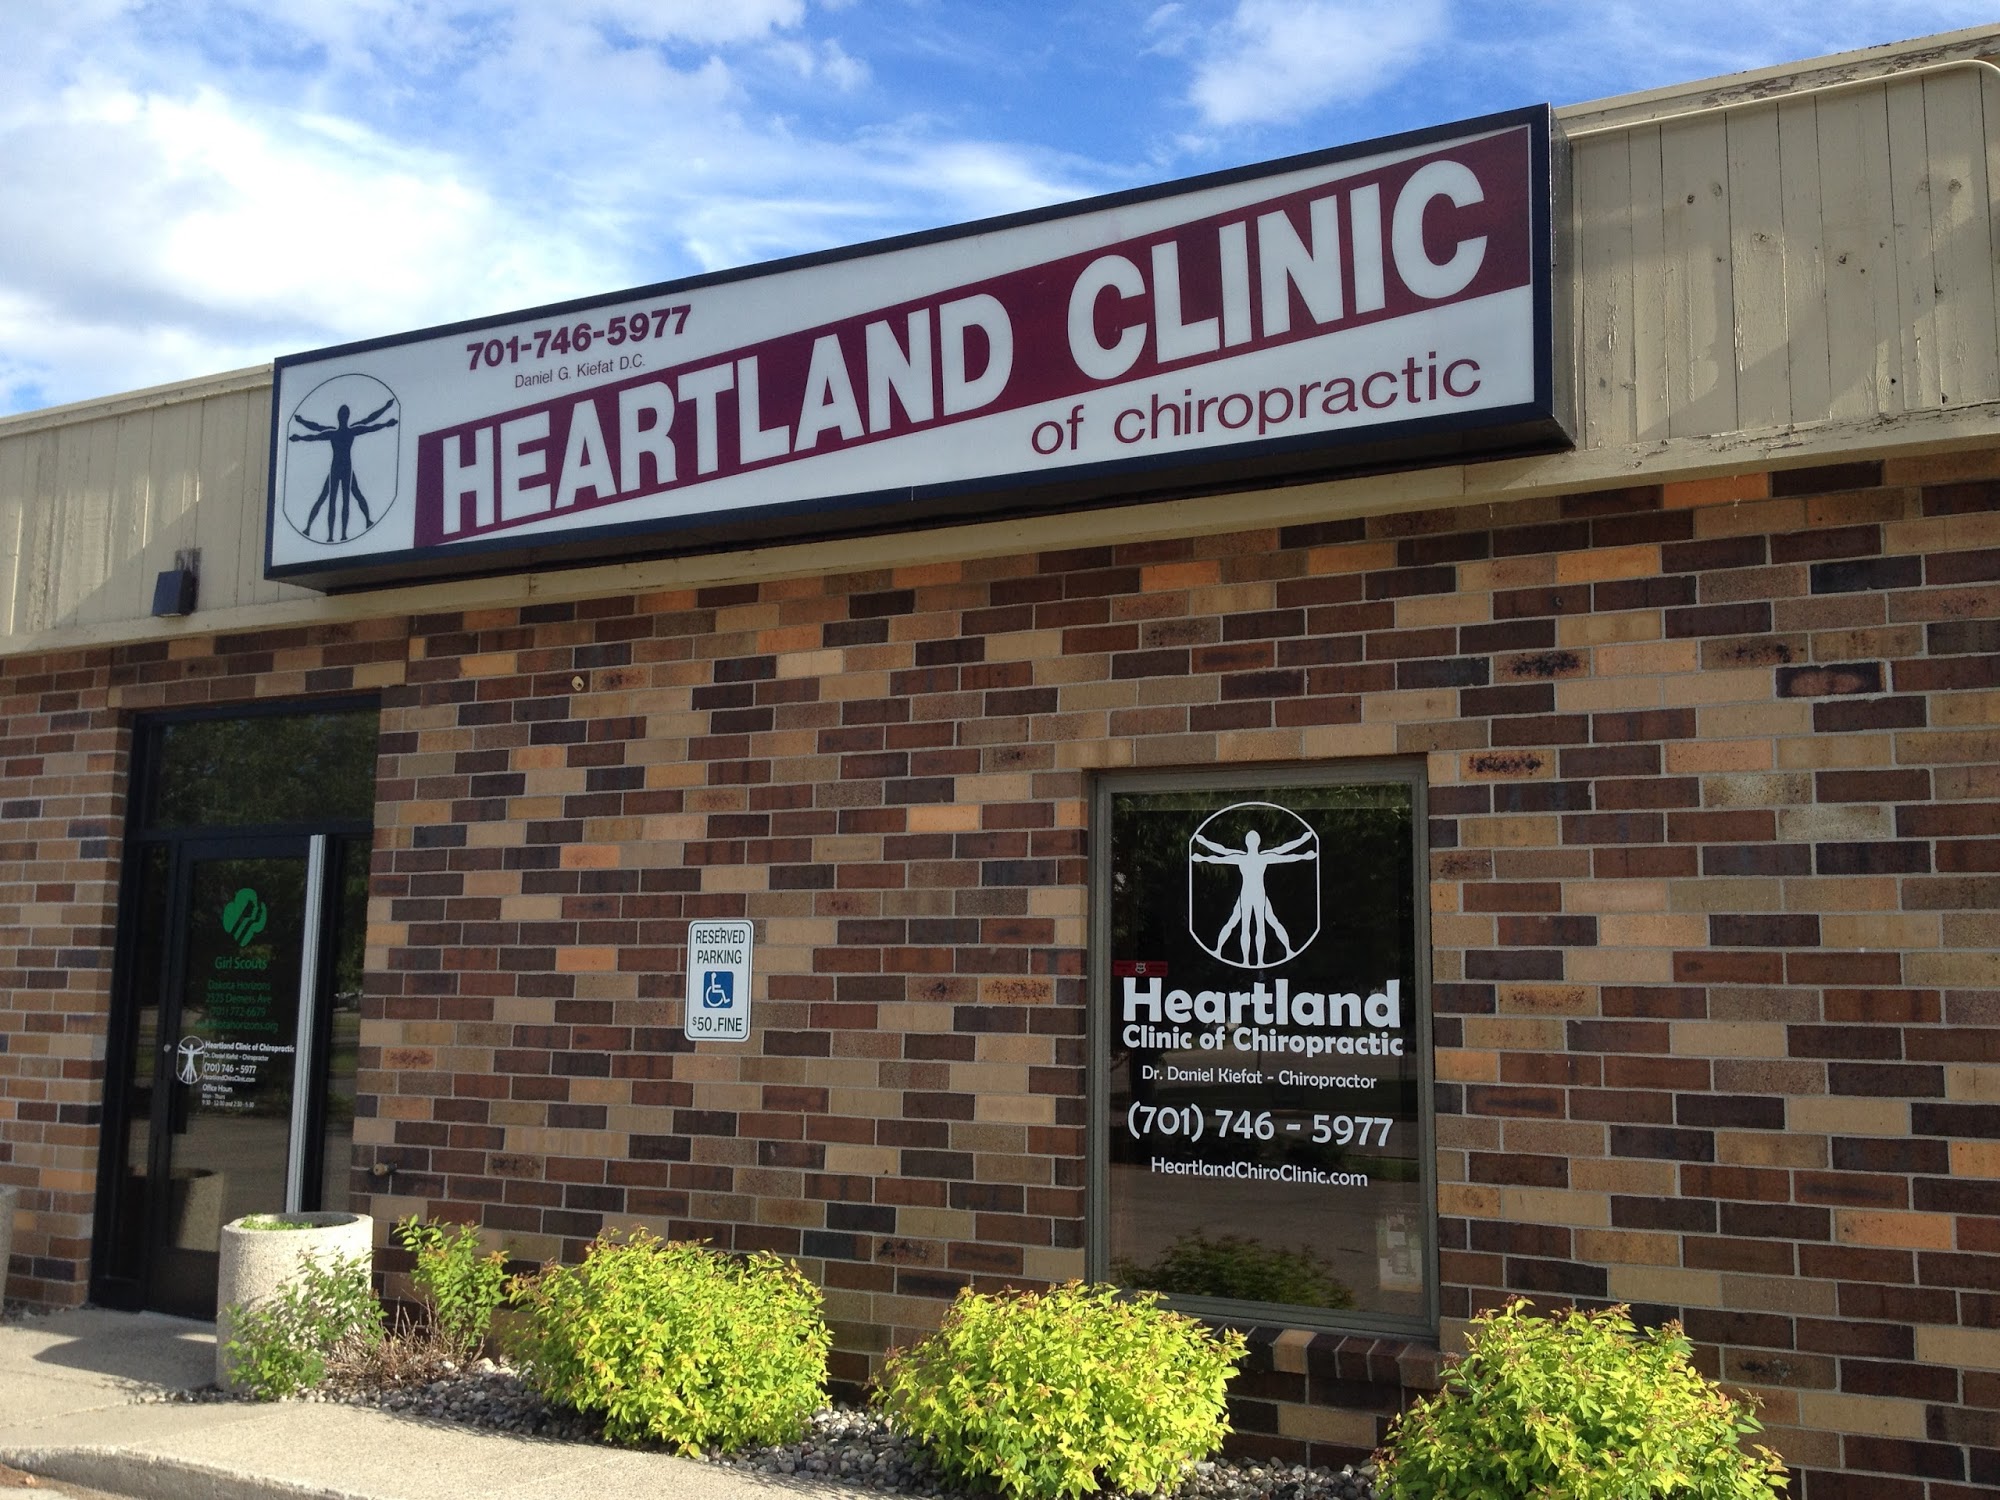 Heartland Clinic of Chiropractic